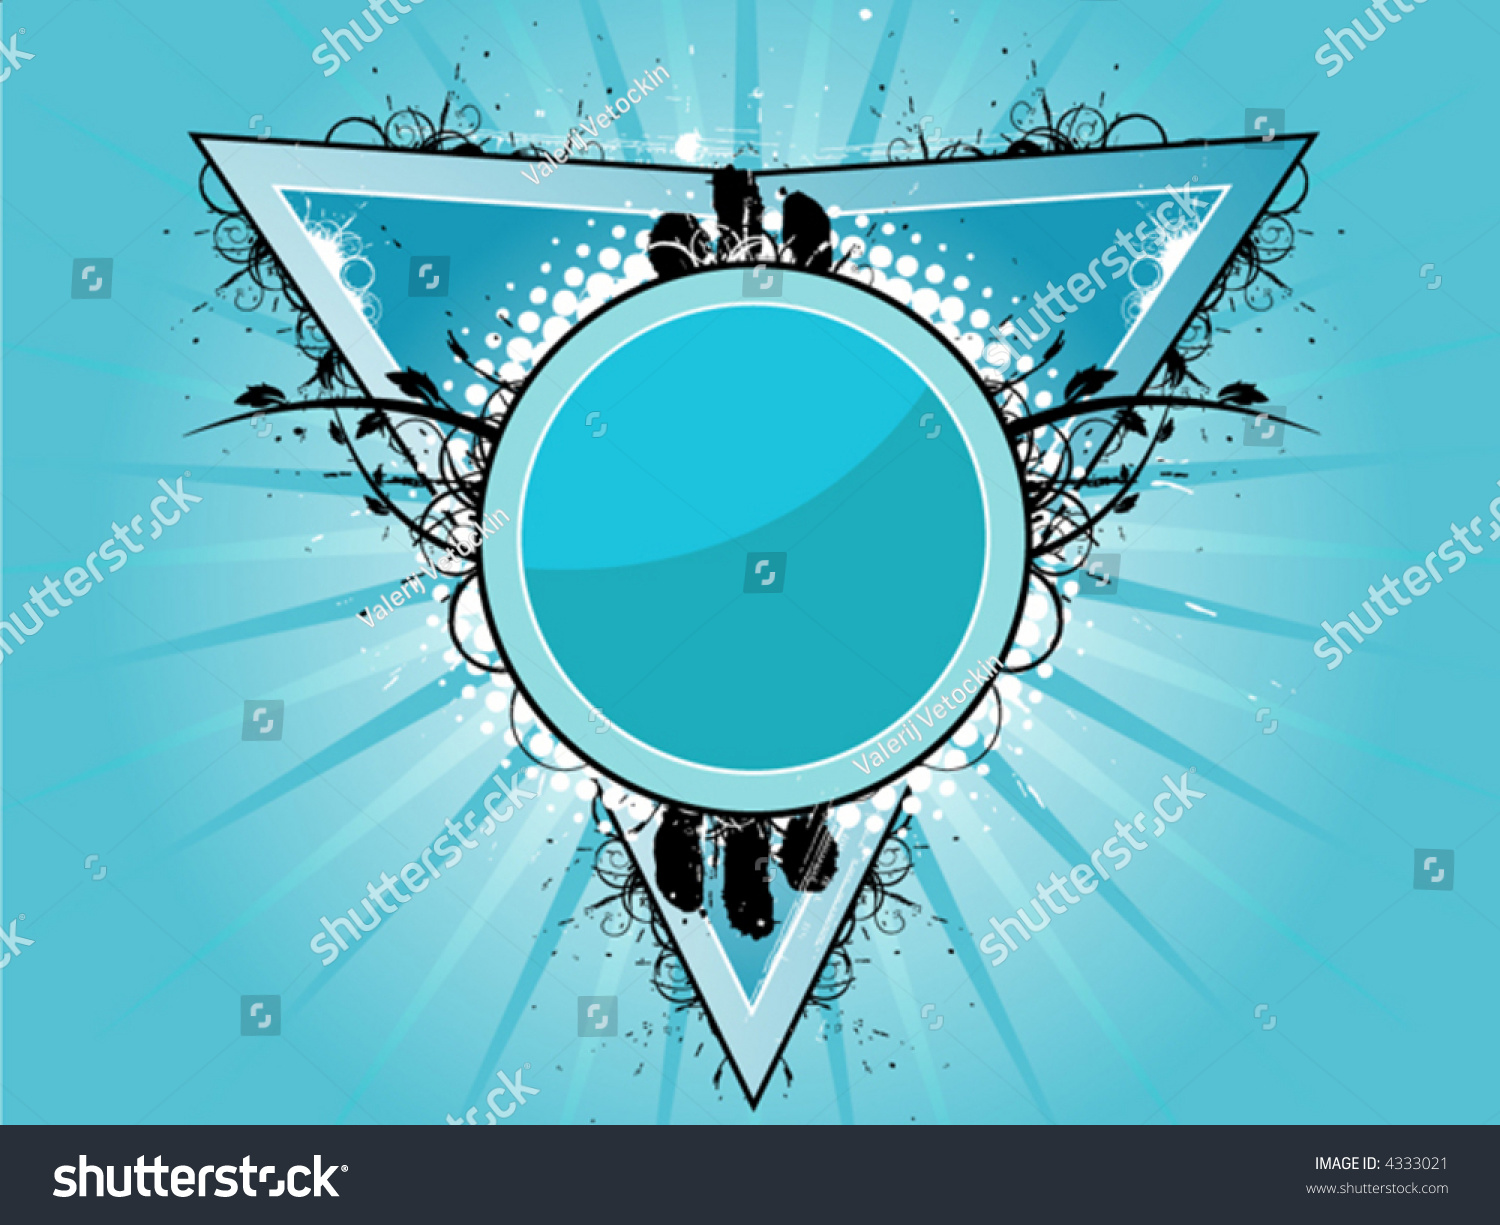 Triangle And Circle Vector Logo - 4333021 : Shutterstock